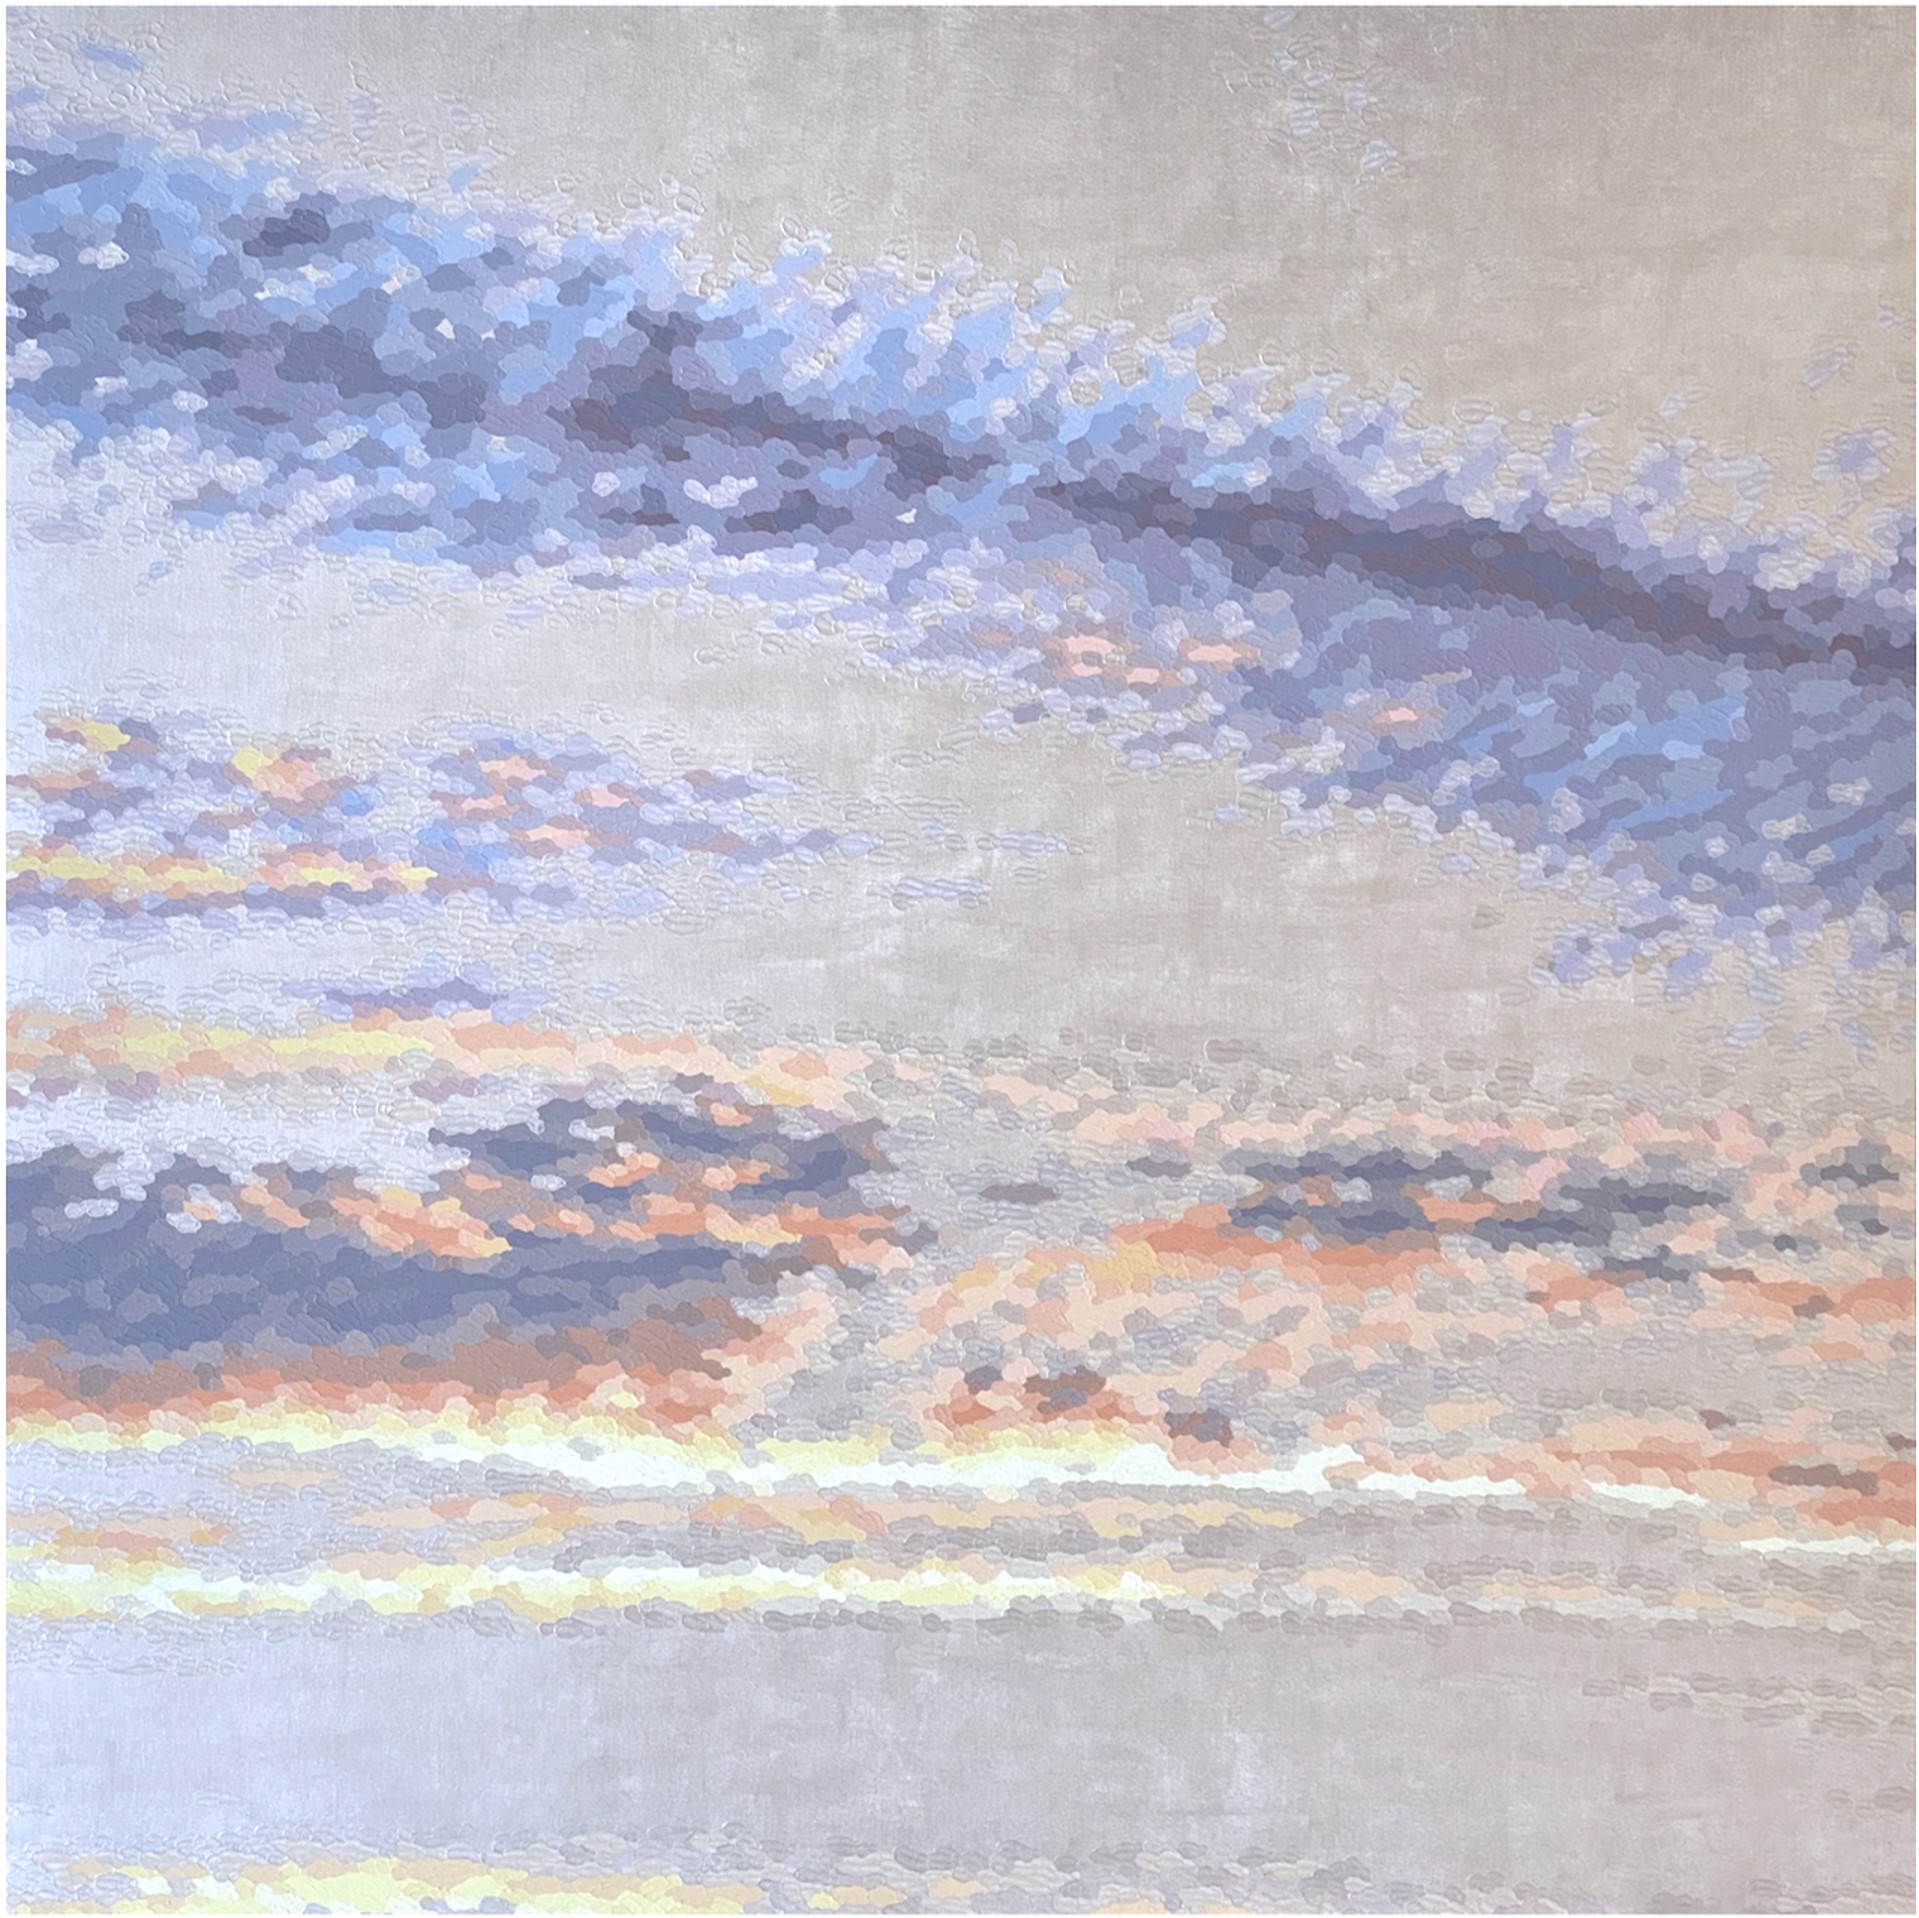 Into a Sorbet Sky by Elaine Coombs